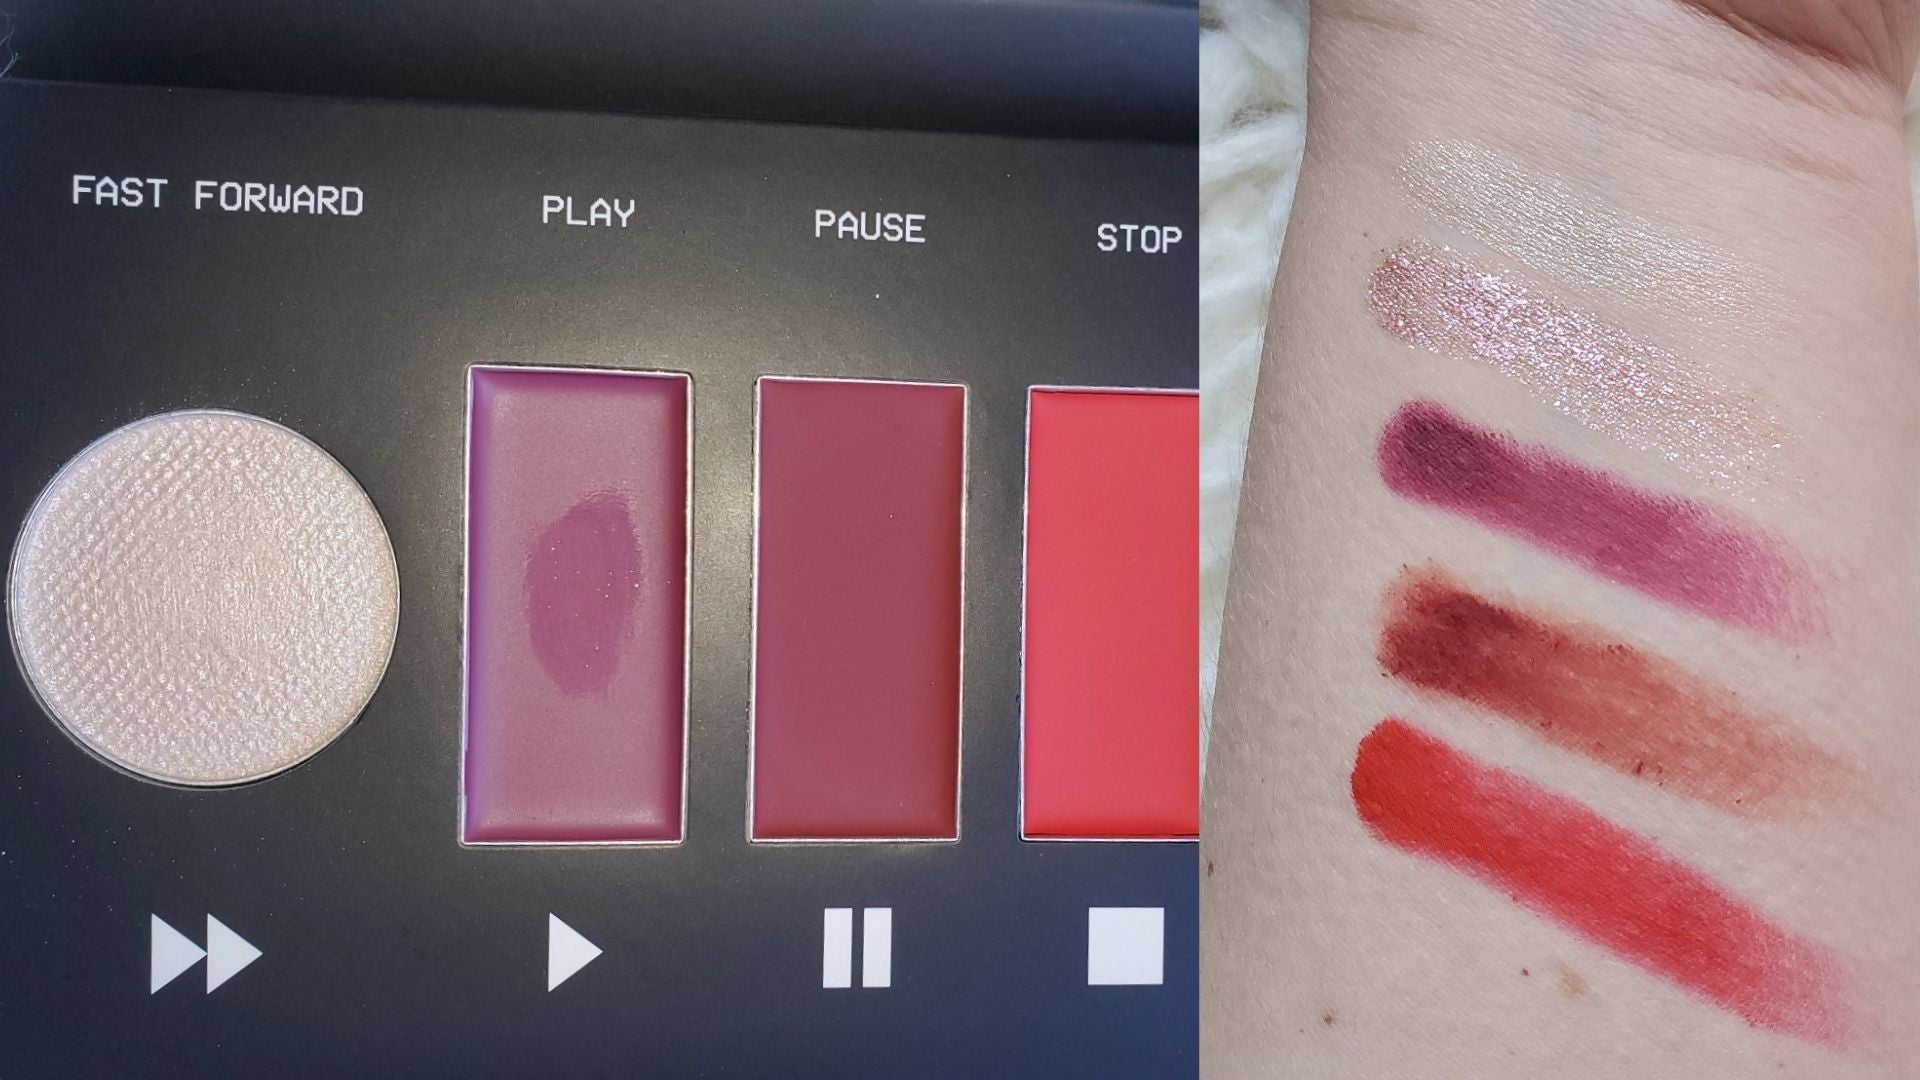 review, photos, swatches, makeup, trends, 2021, 2022, nosta beauty, swatch me face palette vol. 1, highlighters, eyeshadow, lipstick, blush, best new makeup products, nostalgic makeup products